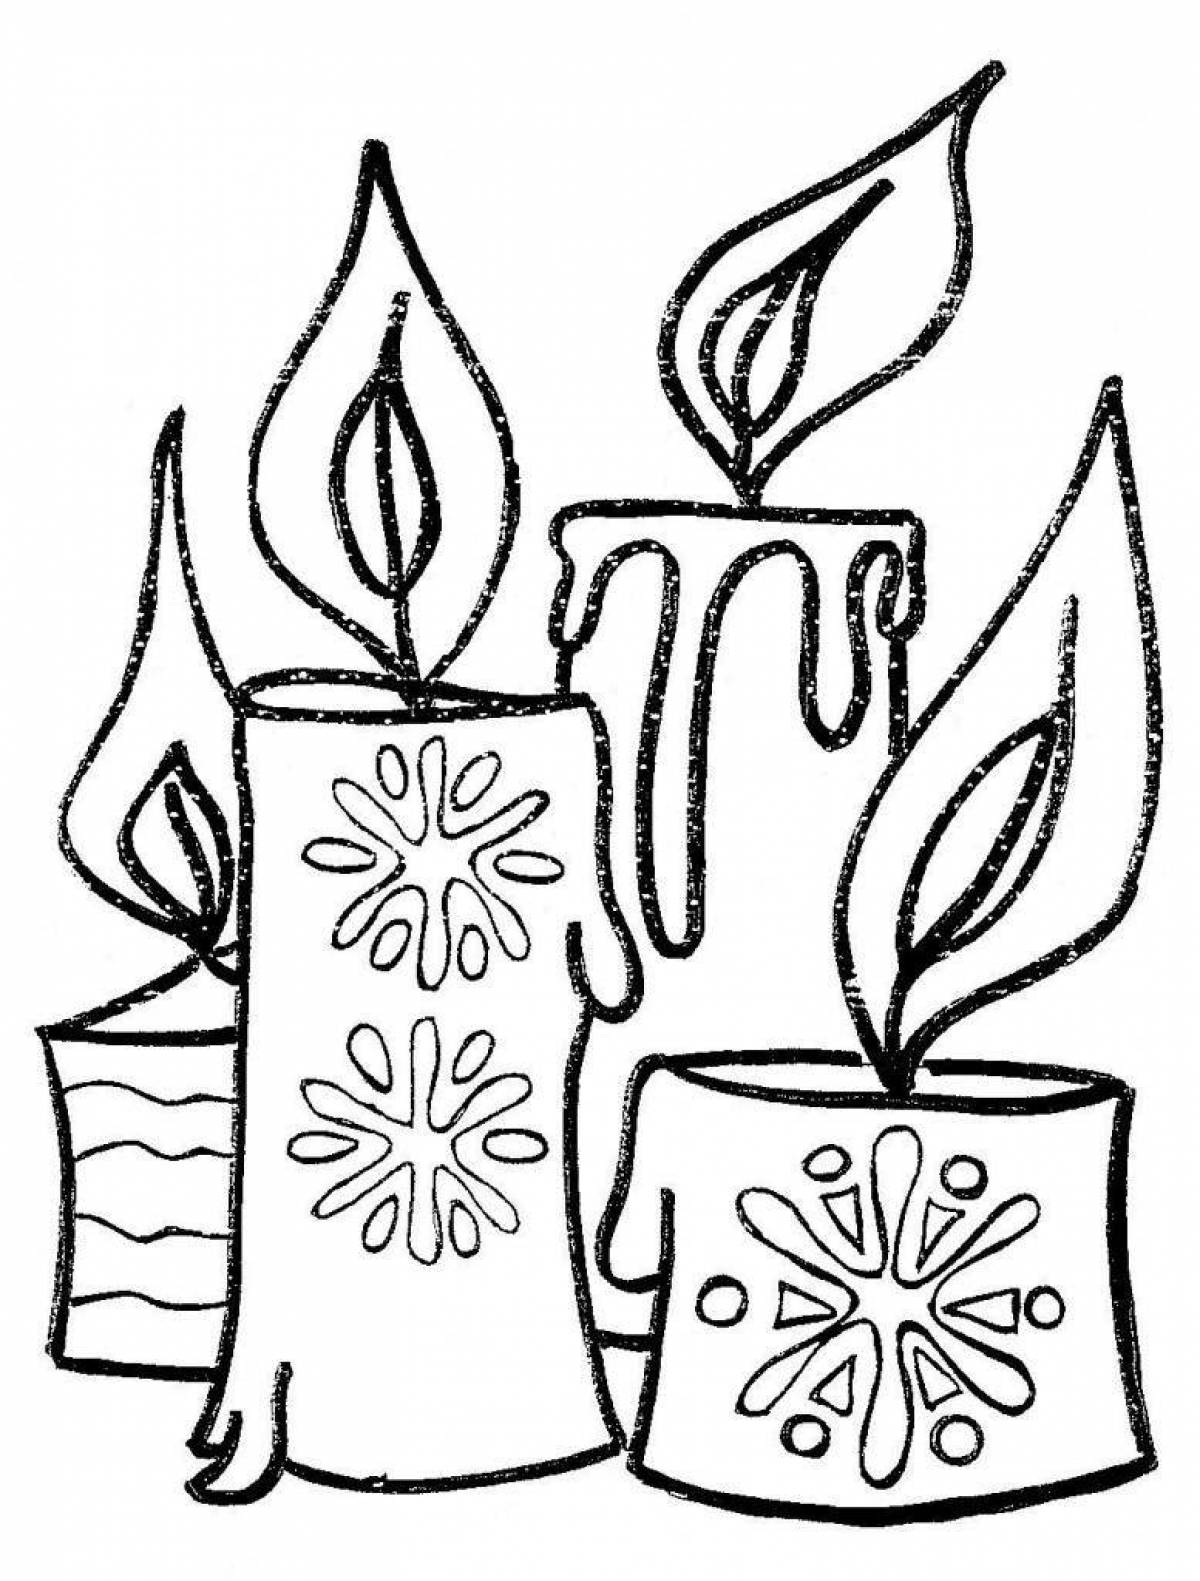 Magic Christmas Candle Coloring Page